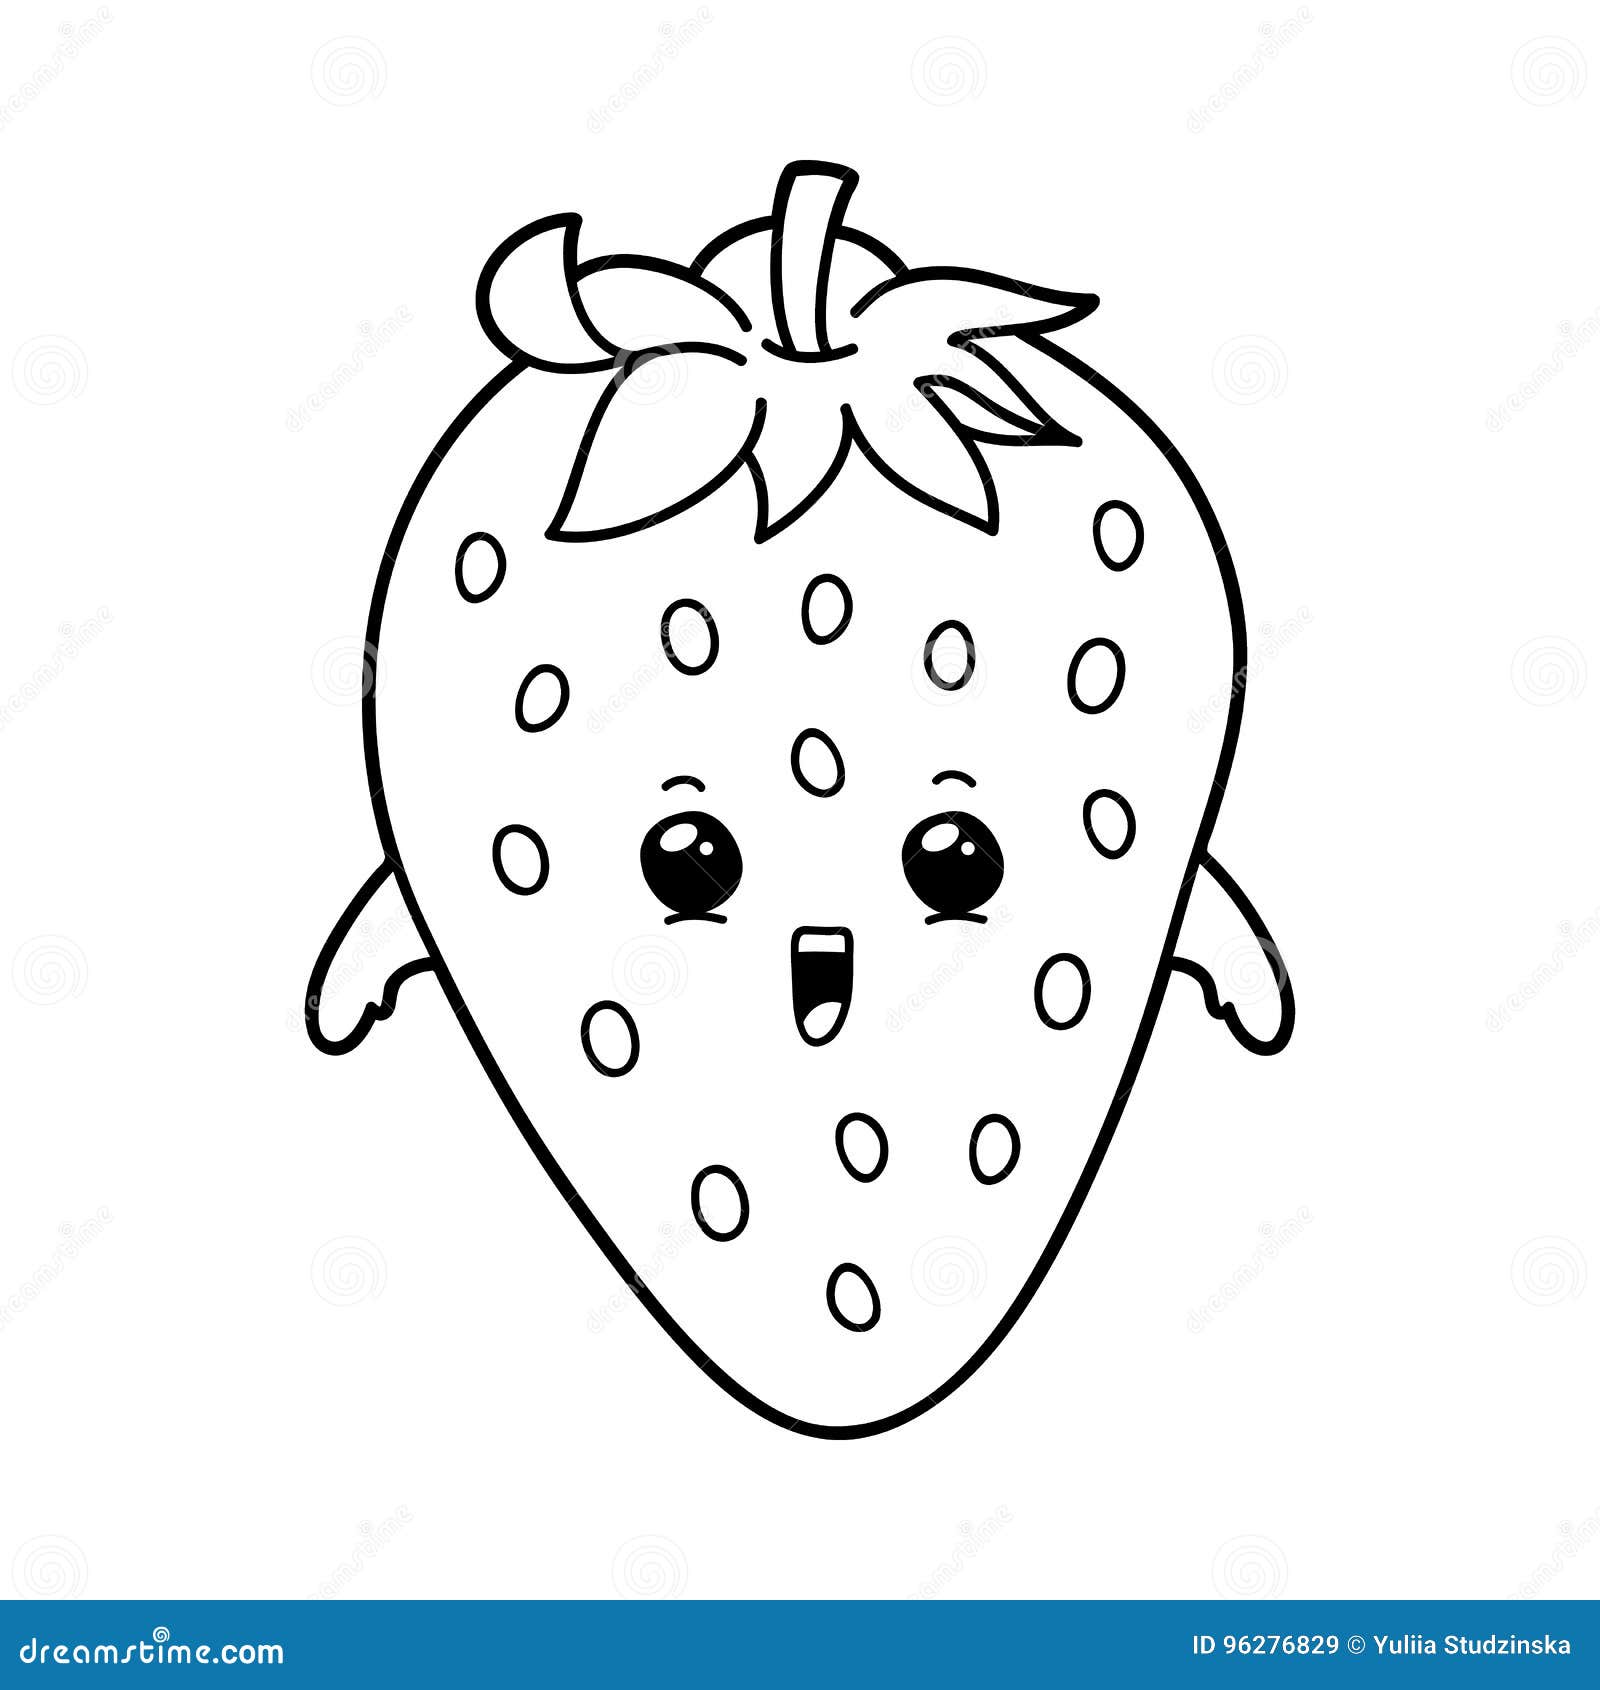 Cute Cartoon Outlines Strawberry Character Stock Illustration -  Illustration of painting, line: 96276829